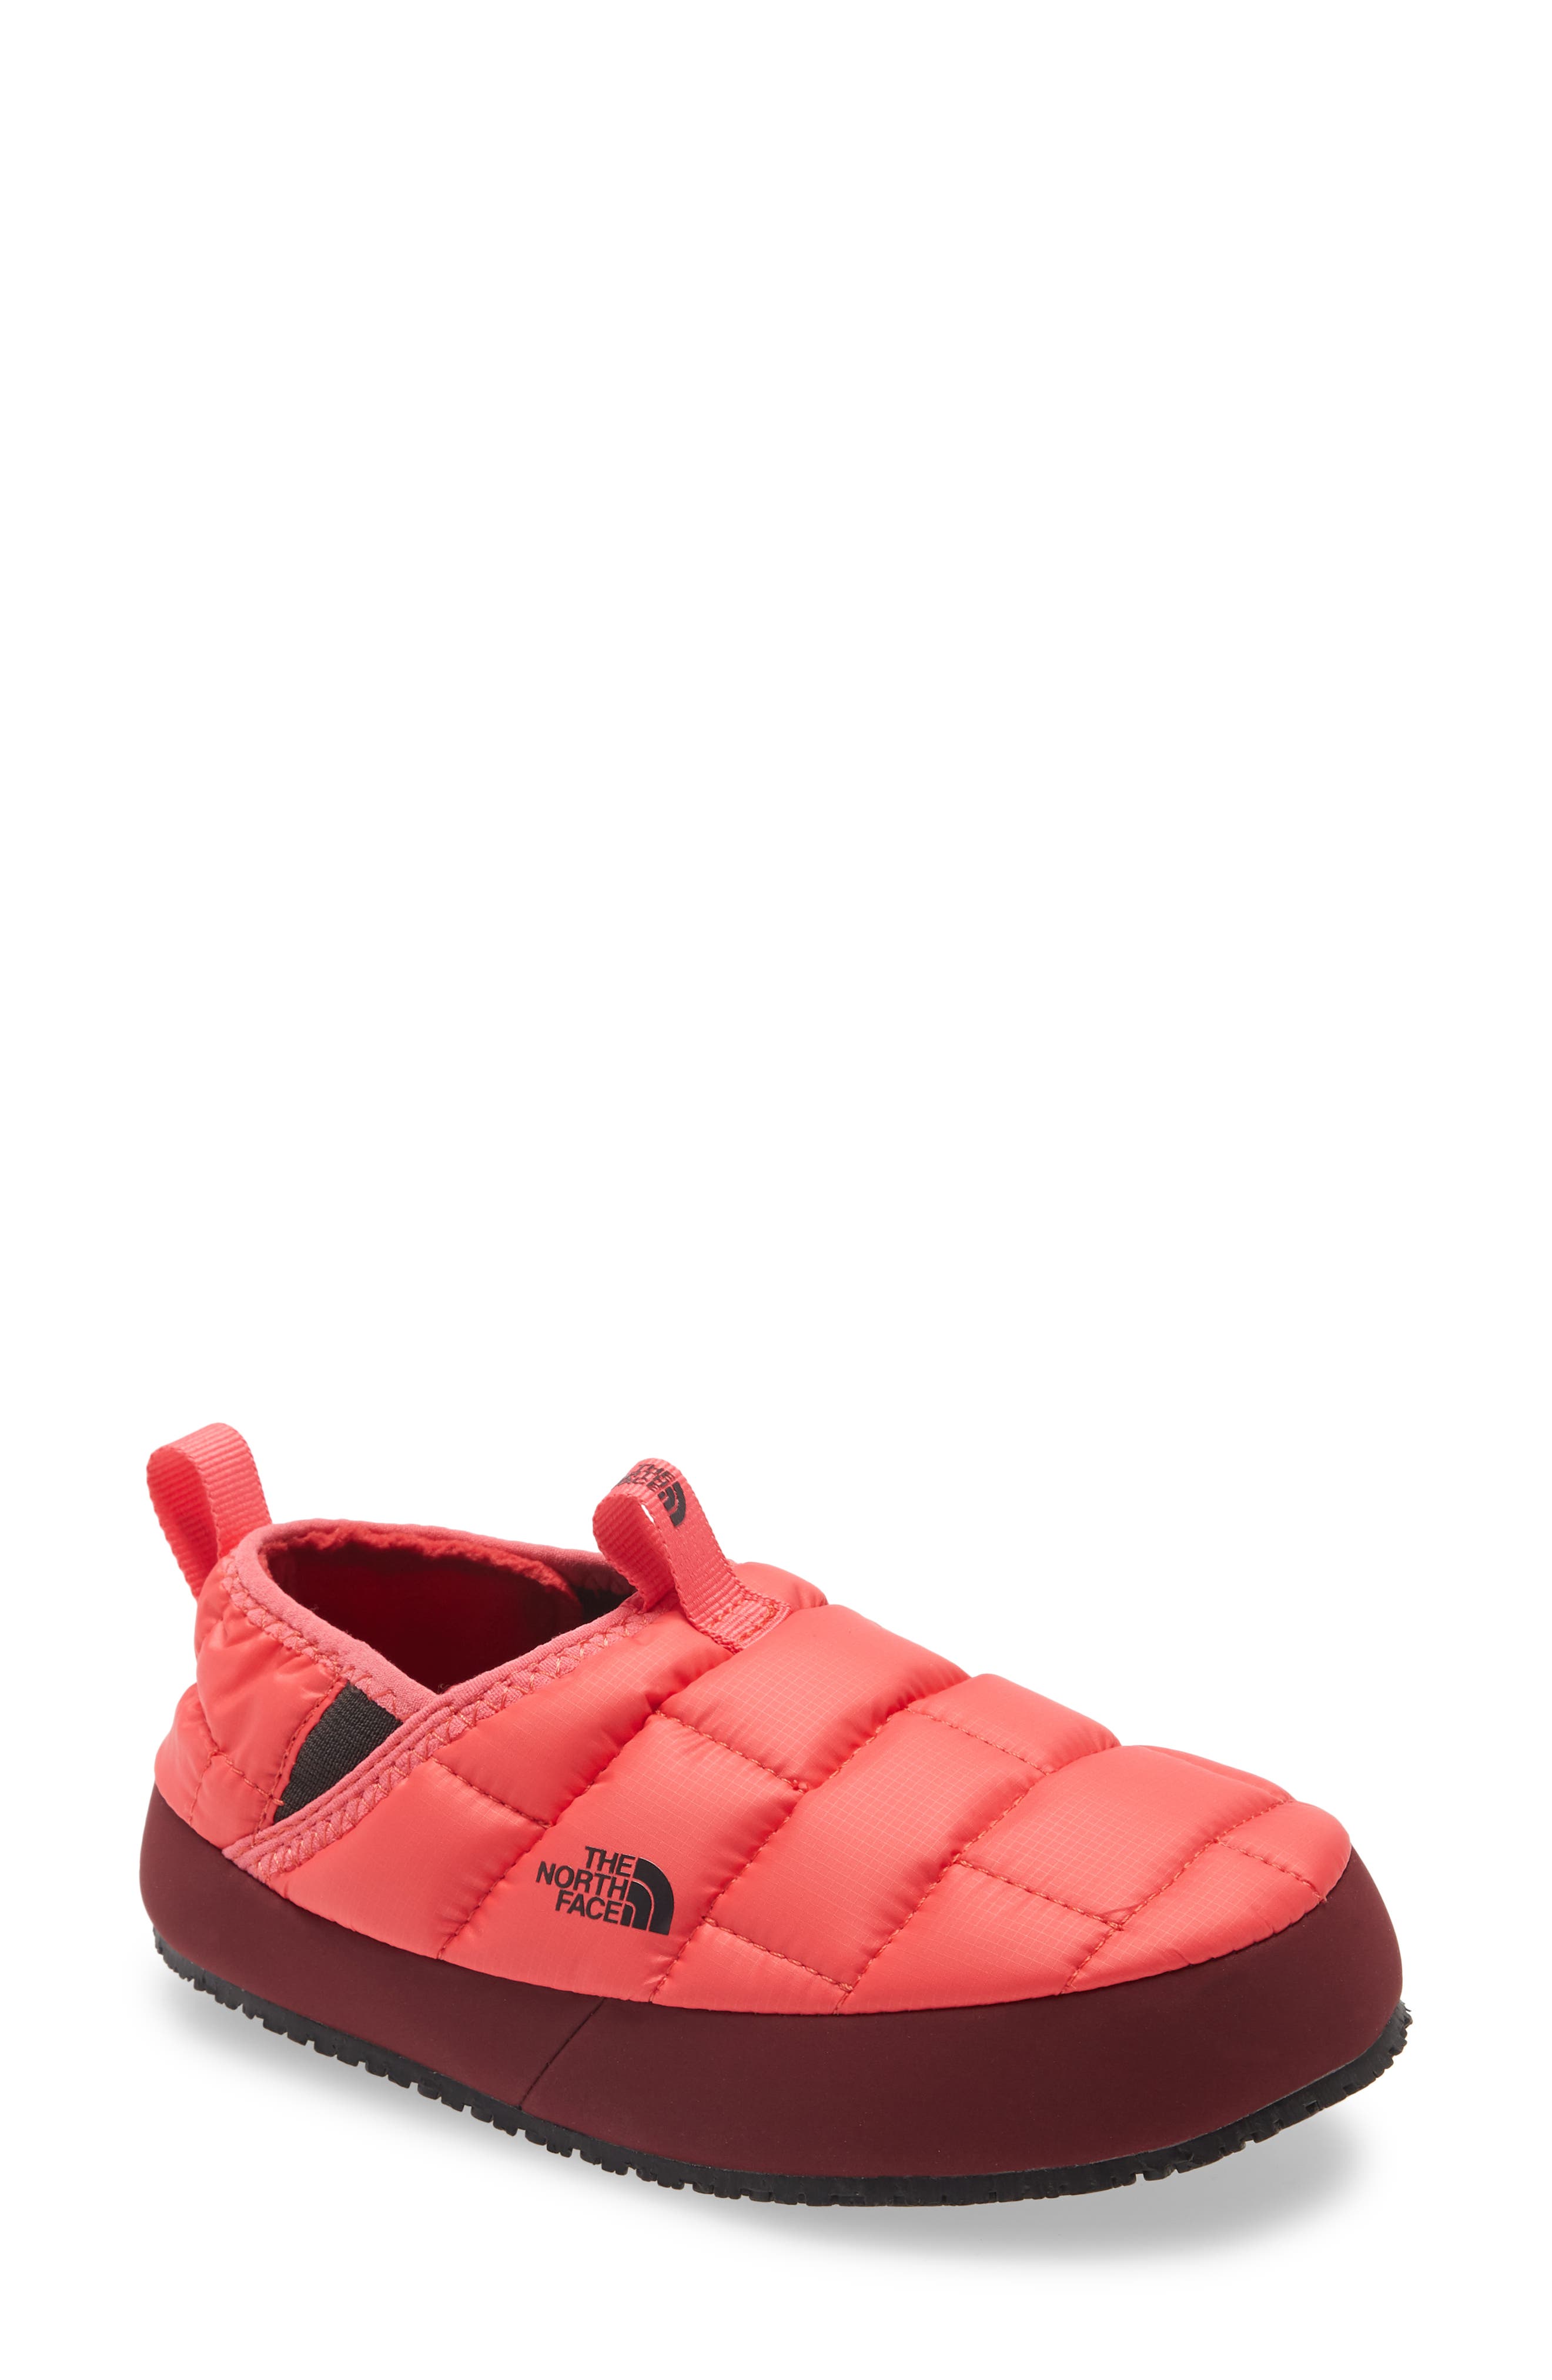 north face thermal shoes